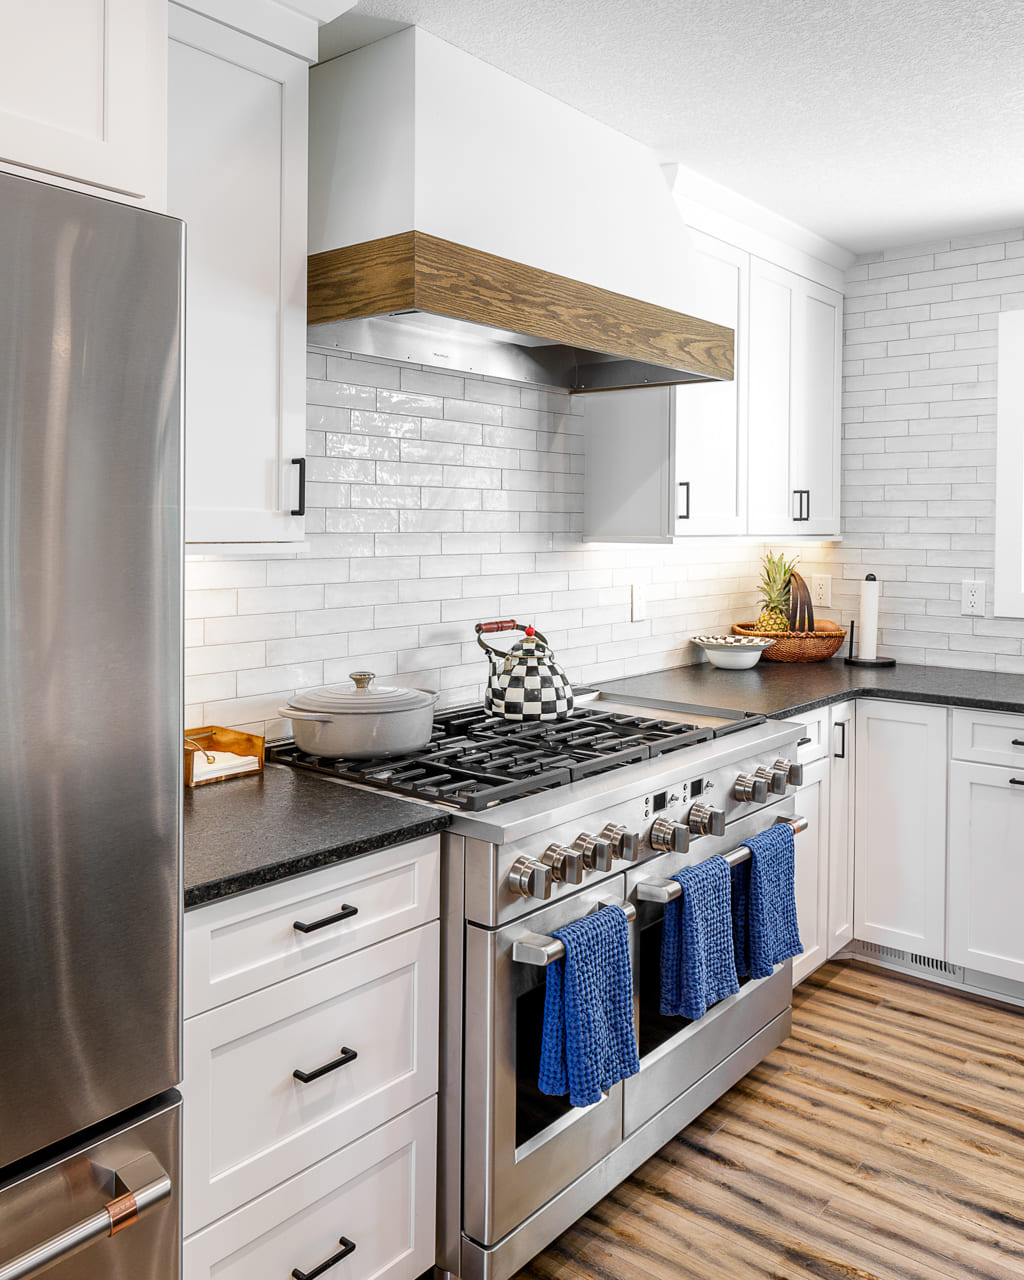 Chef Area with Wood-Trimmed Exhaust and Glass Subway Tile | Compelling Homes